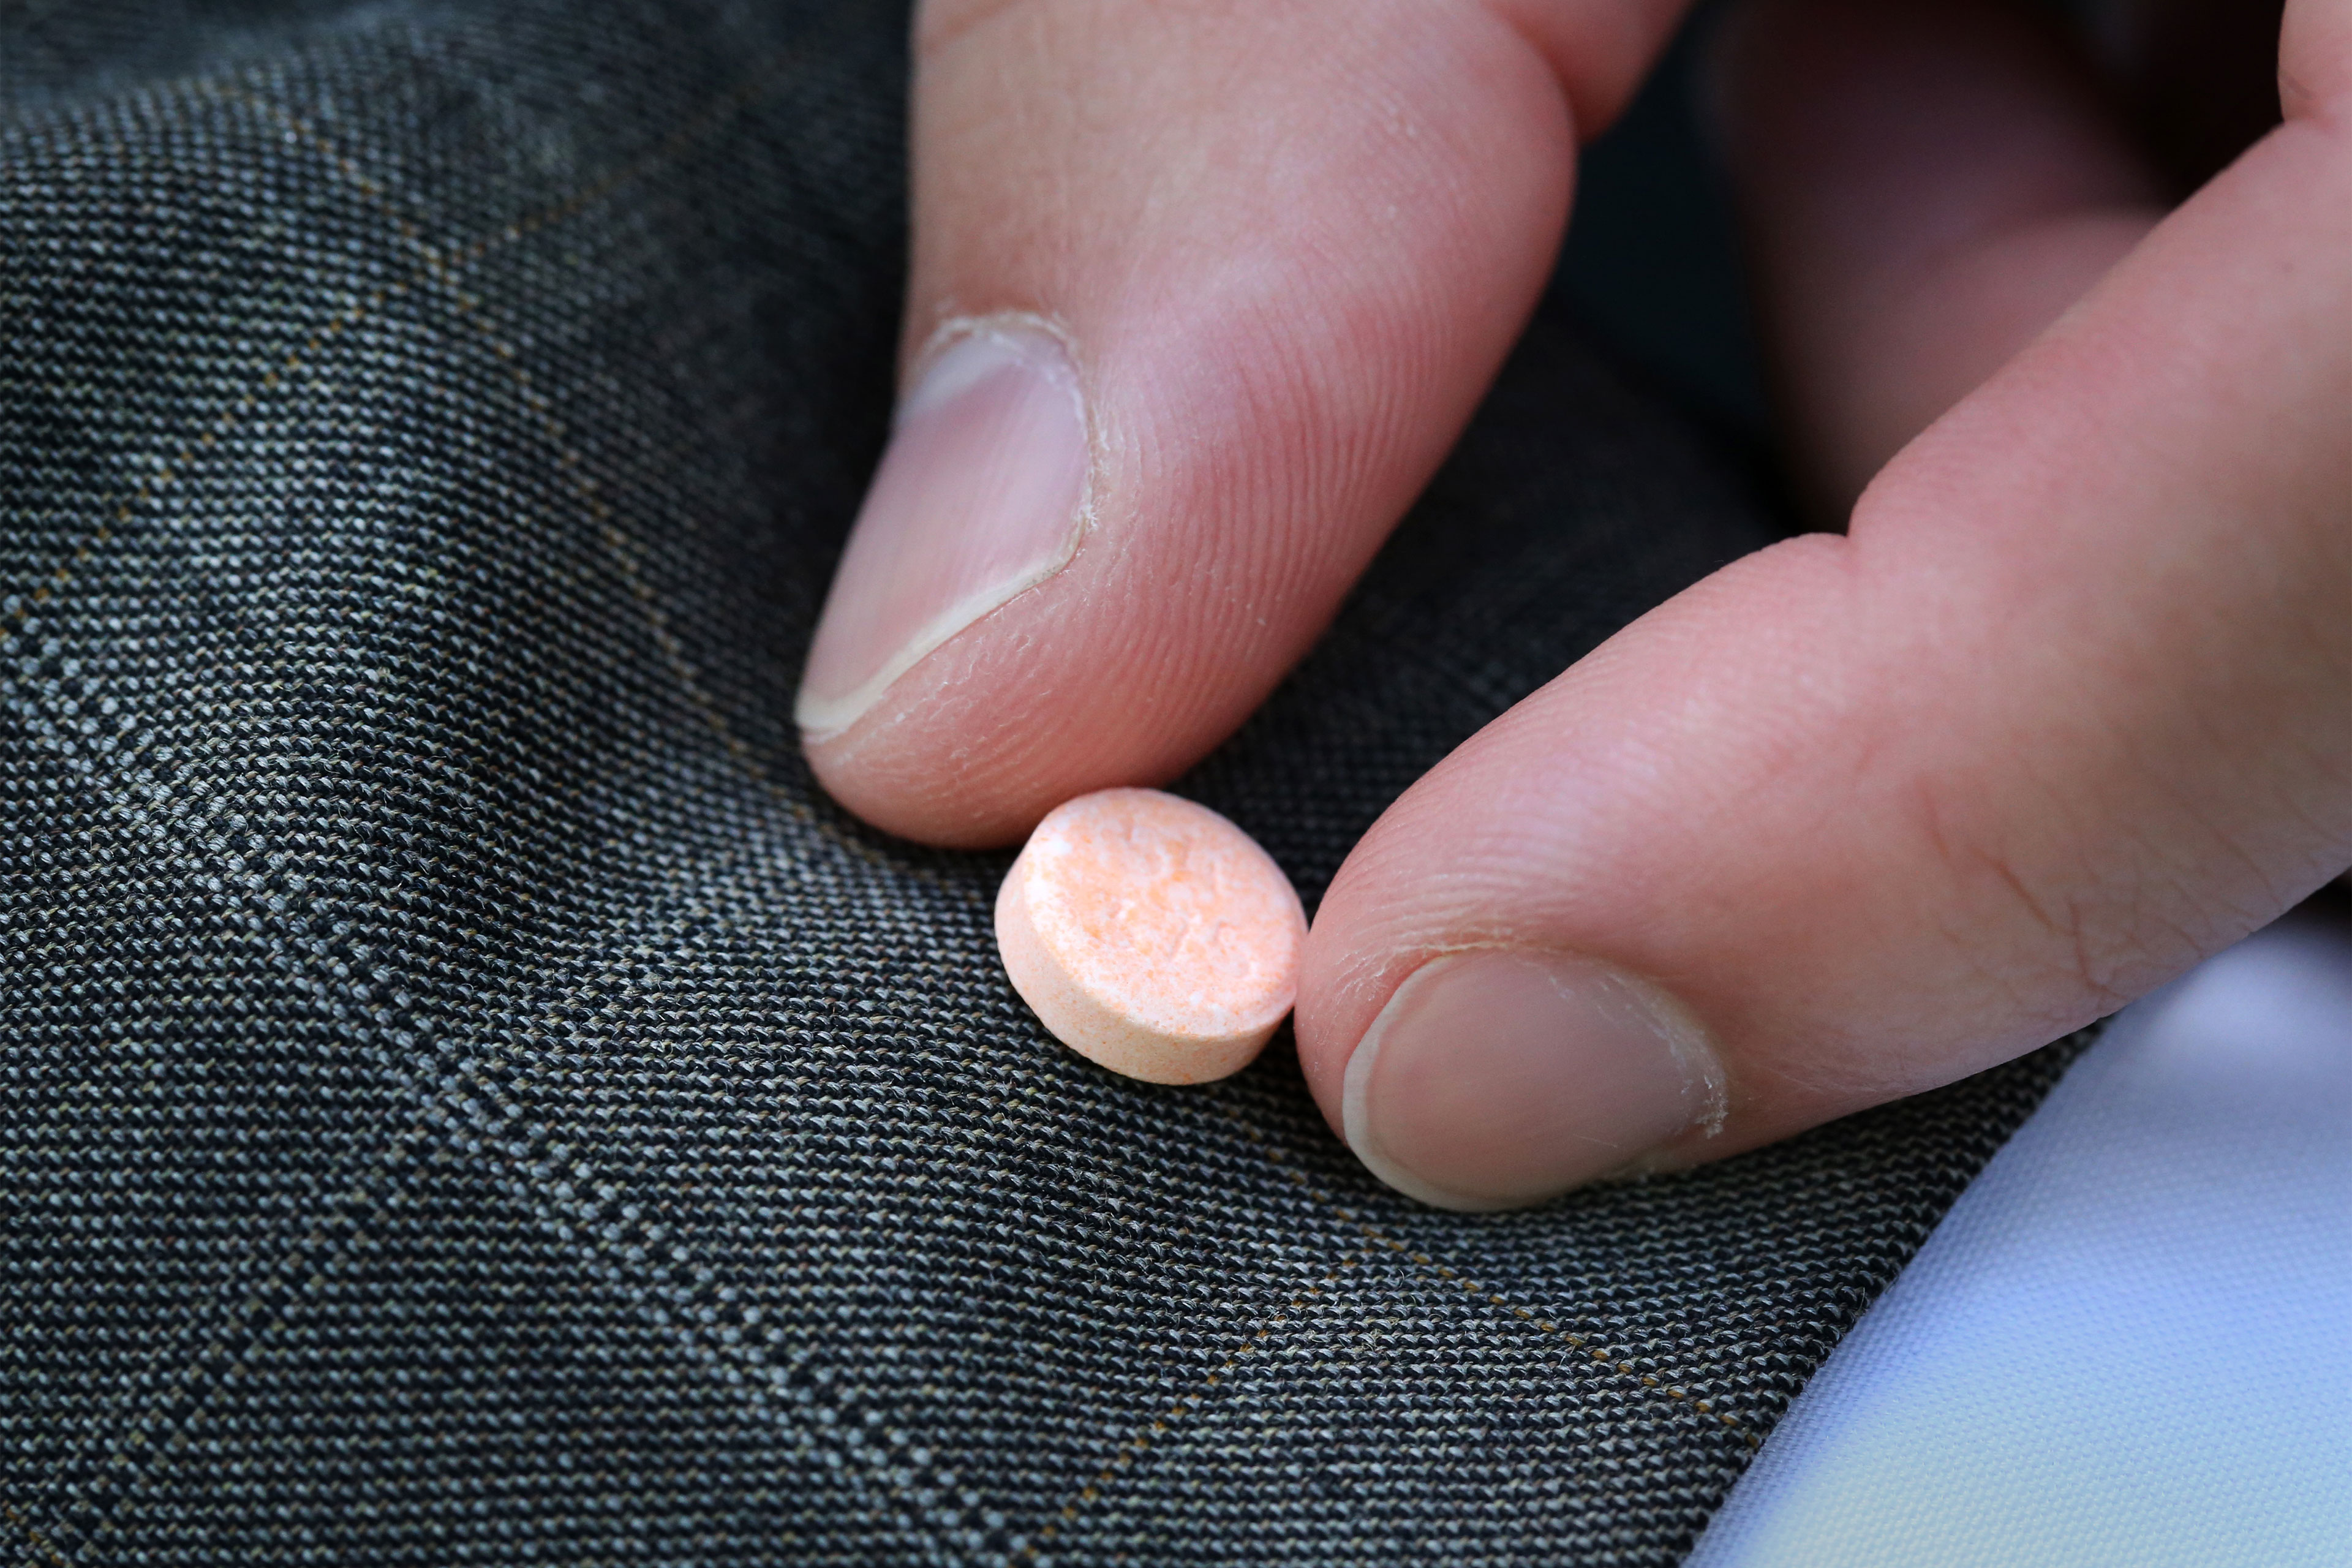 One photo shows someone holding a Suboxone tablet.